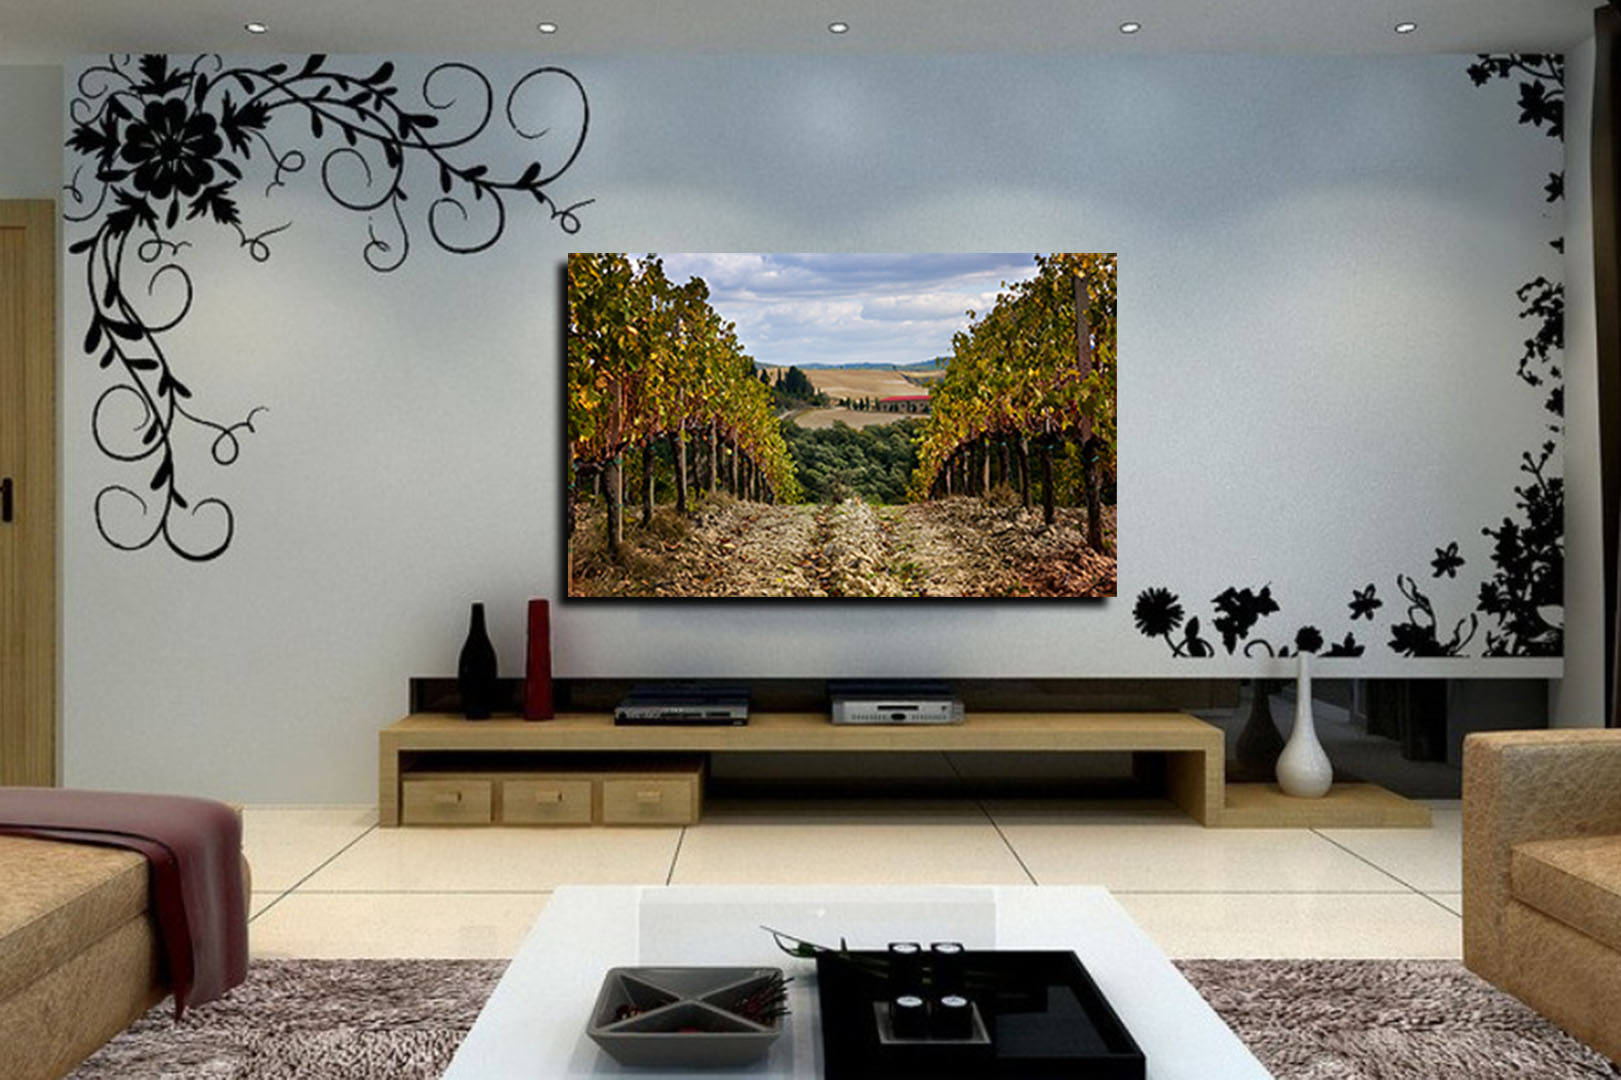 d-living-room-interior-tv-wall-picture-d-house-free-d-house-living-room-with-tv.jpg